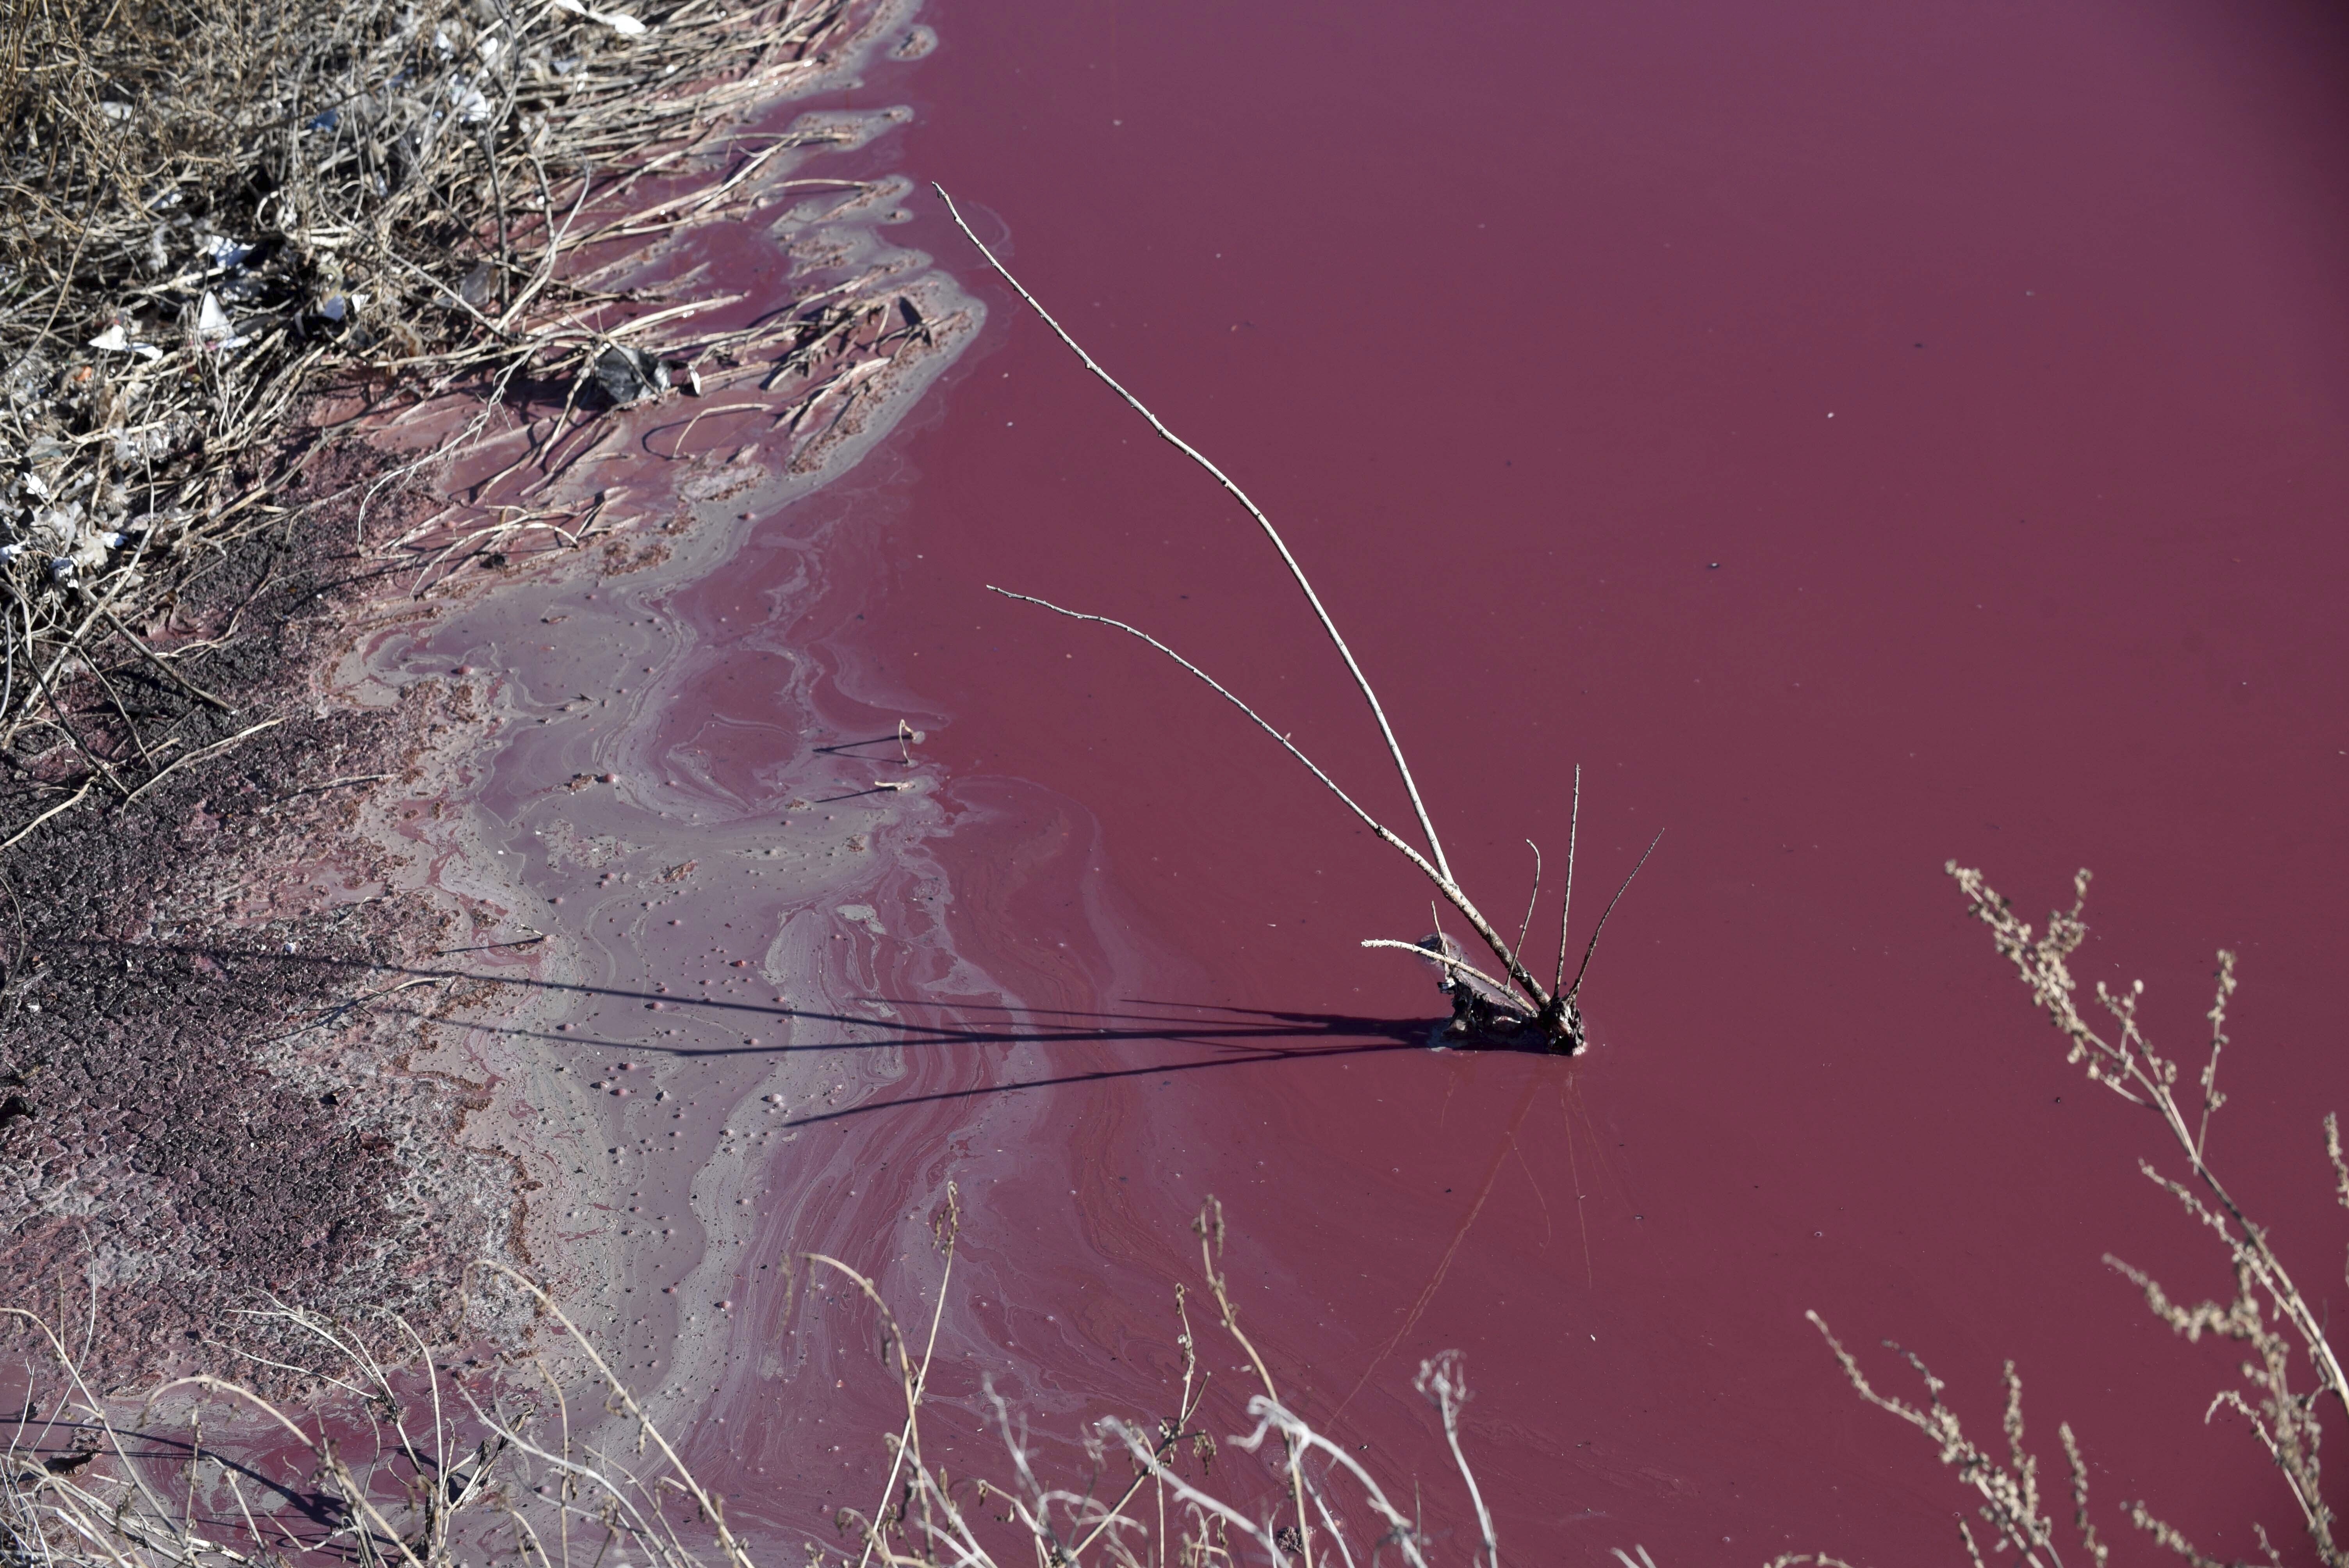 A dead bush sticks out of the water near the shore of Corfo lagoon, that has turned a striking shade of pink